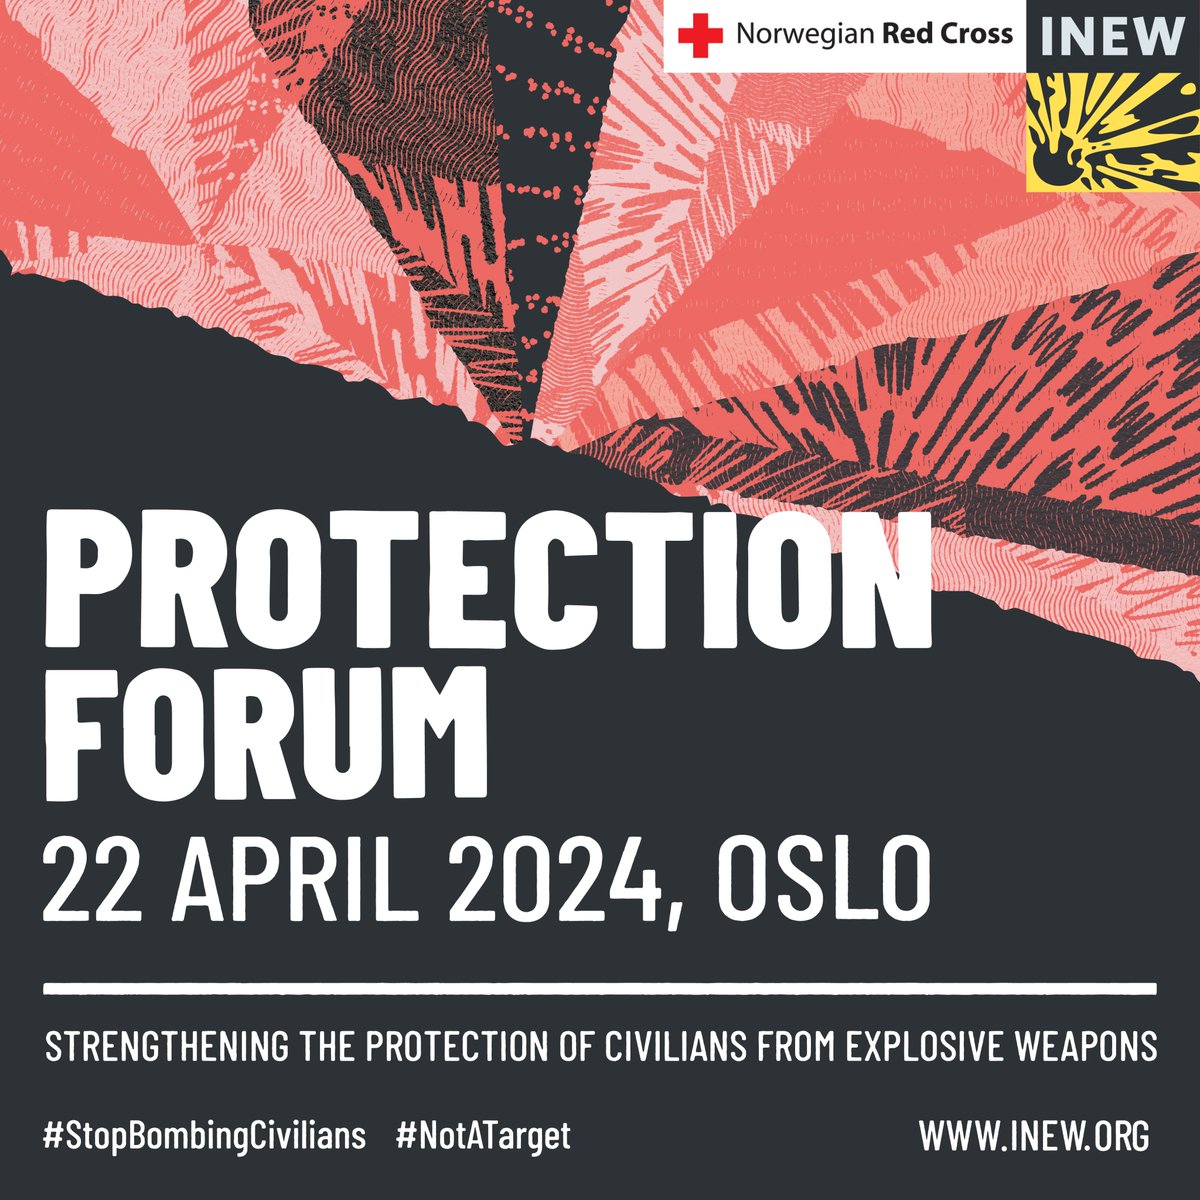 We are a few days away from the Protection Forum, taking place on 22 April. Follow our feed on the day to hear updates and key civil society recommendations. The agenda for the day is available to view here ➡️ bit.ly/49MIYMG #StopBombingCivilians #ProtectionForum24